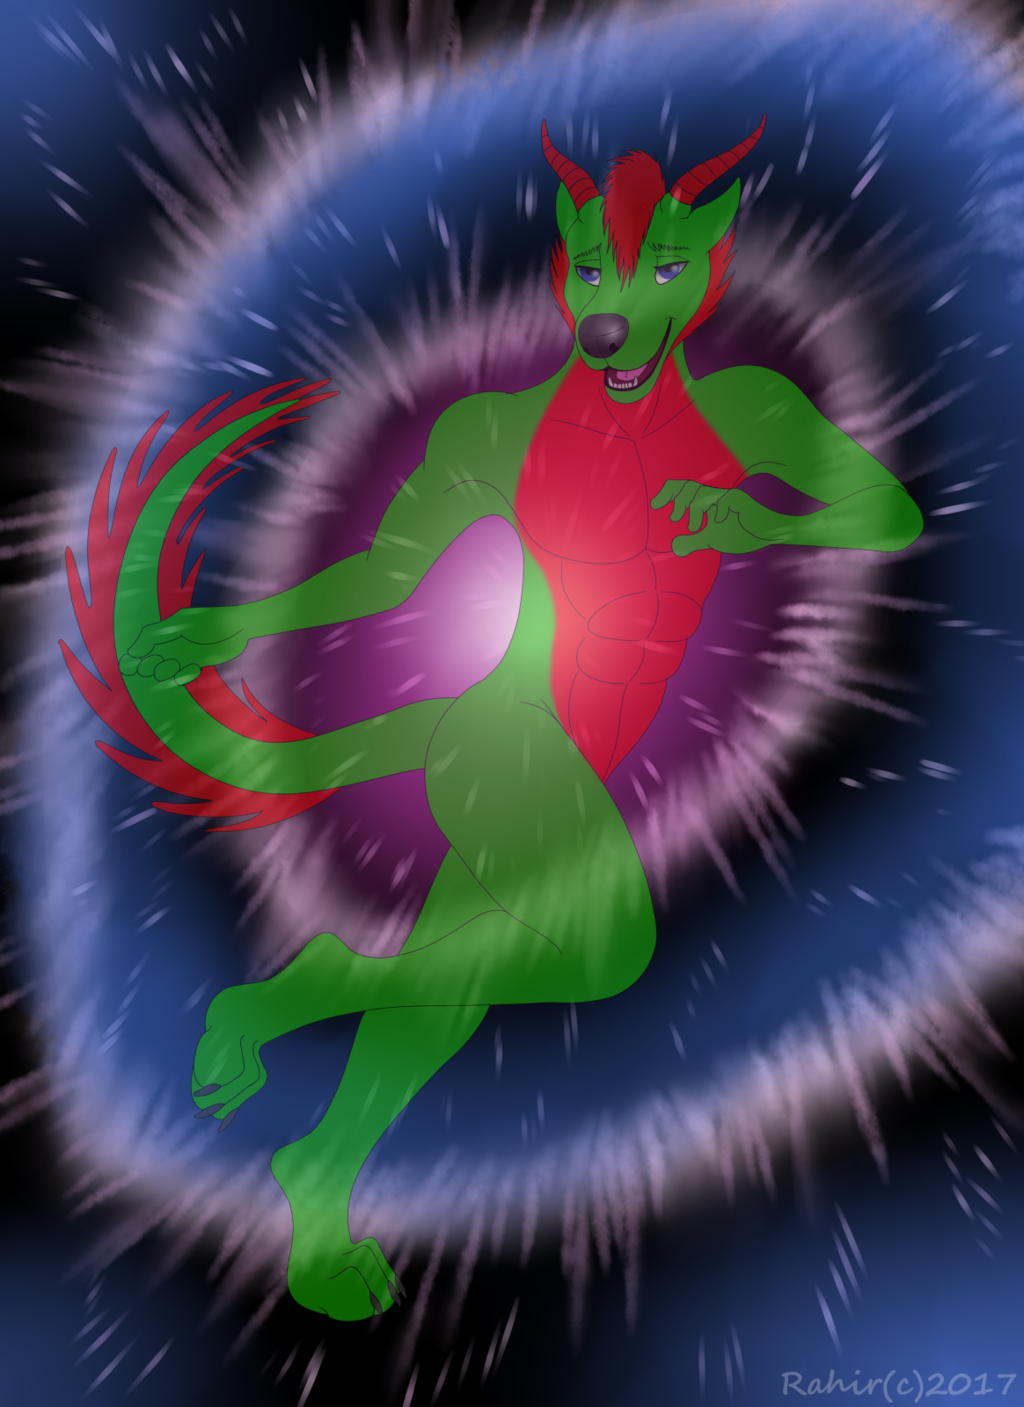 Dog Dragon with a cosmic explosion